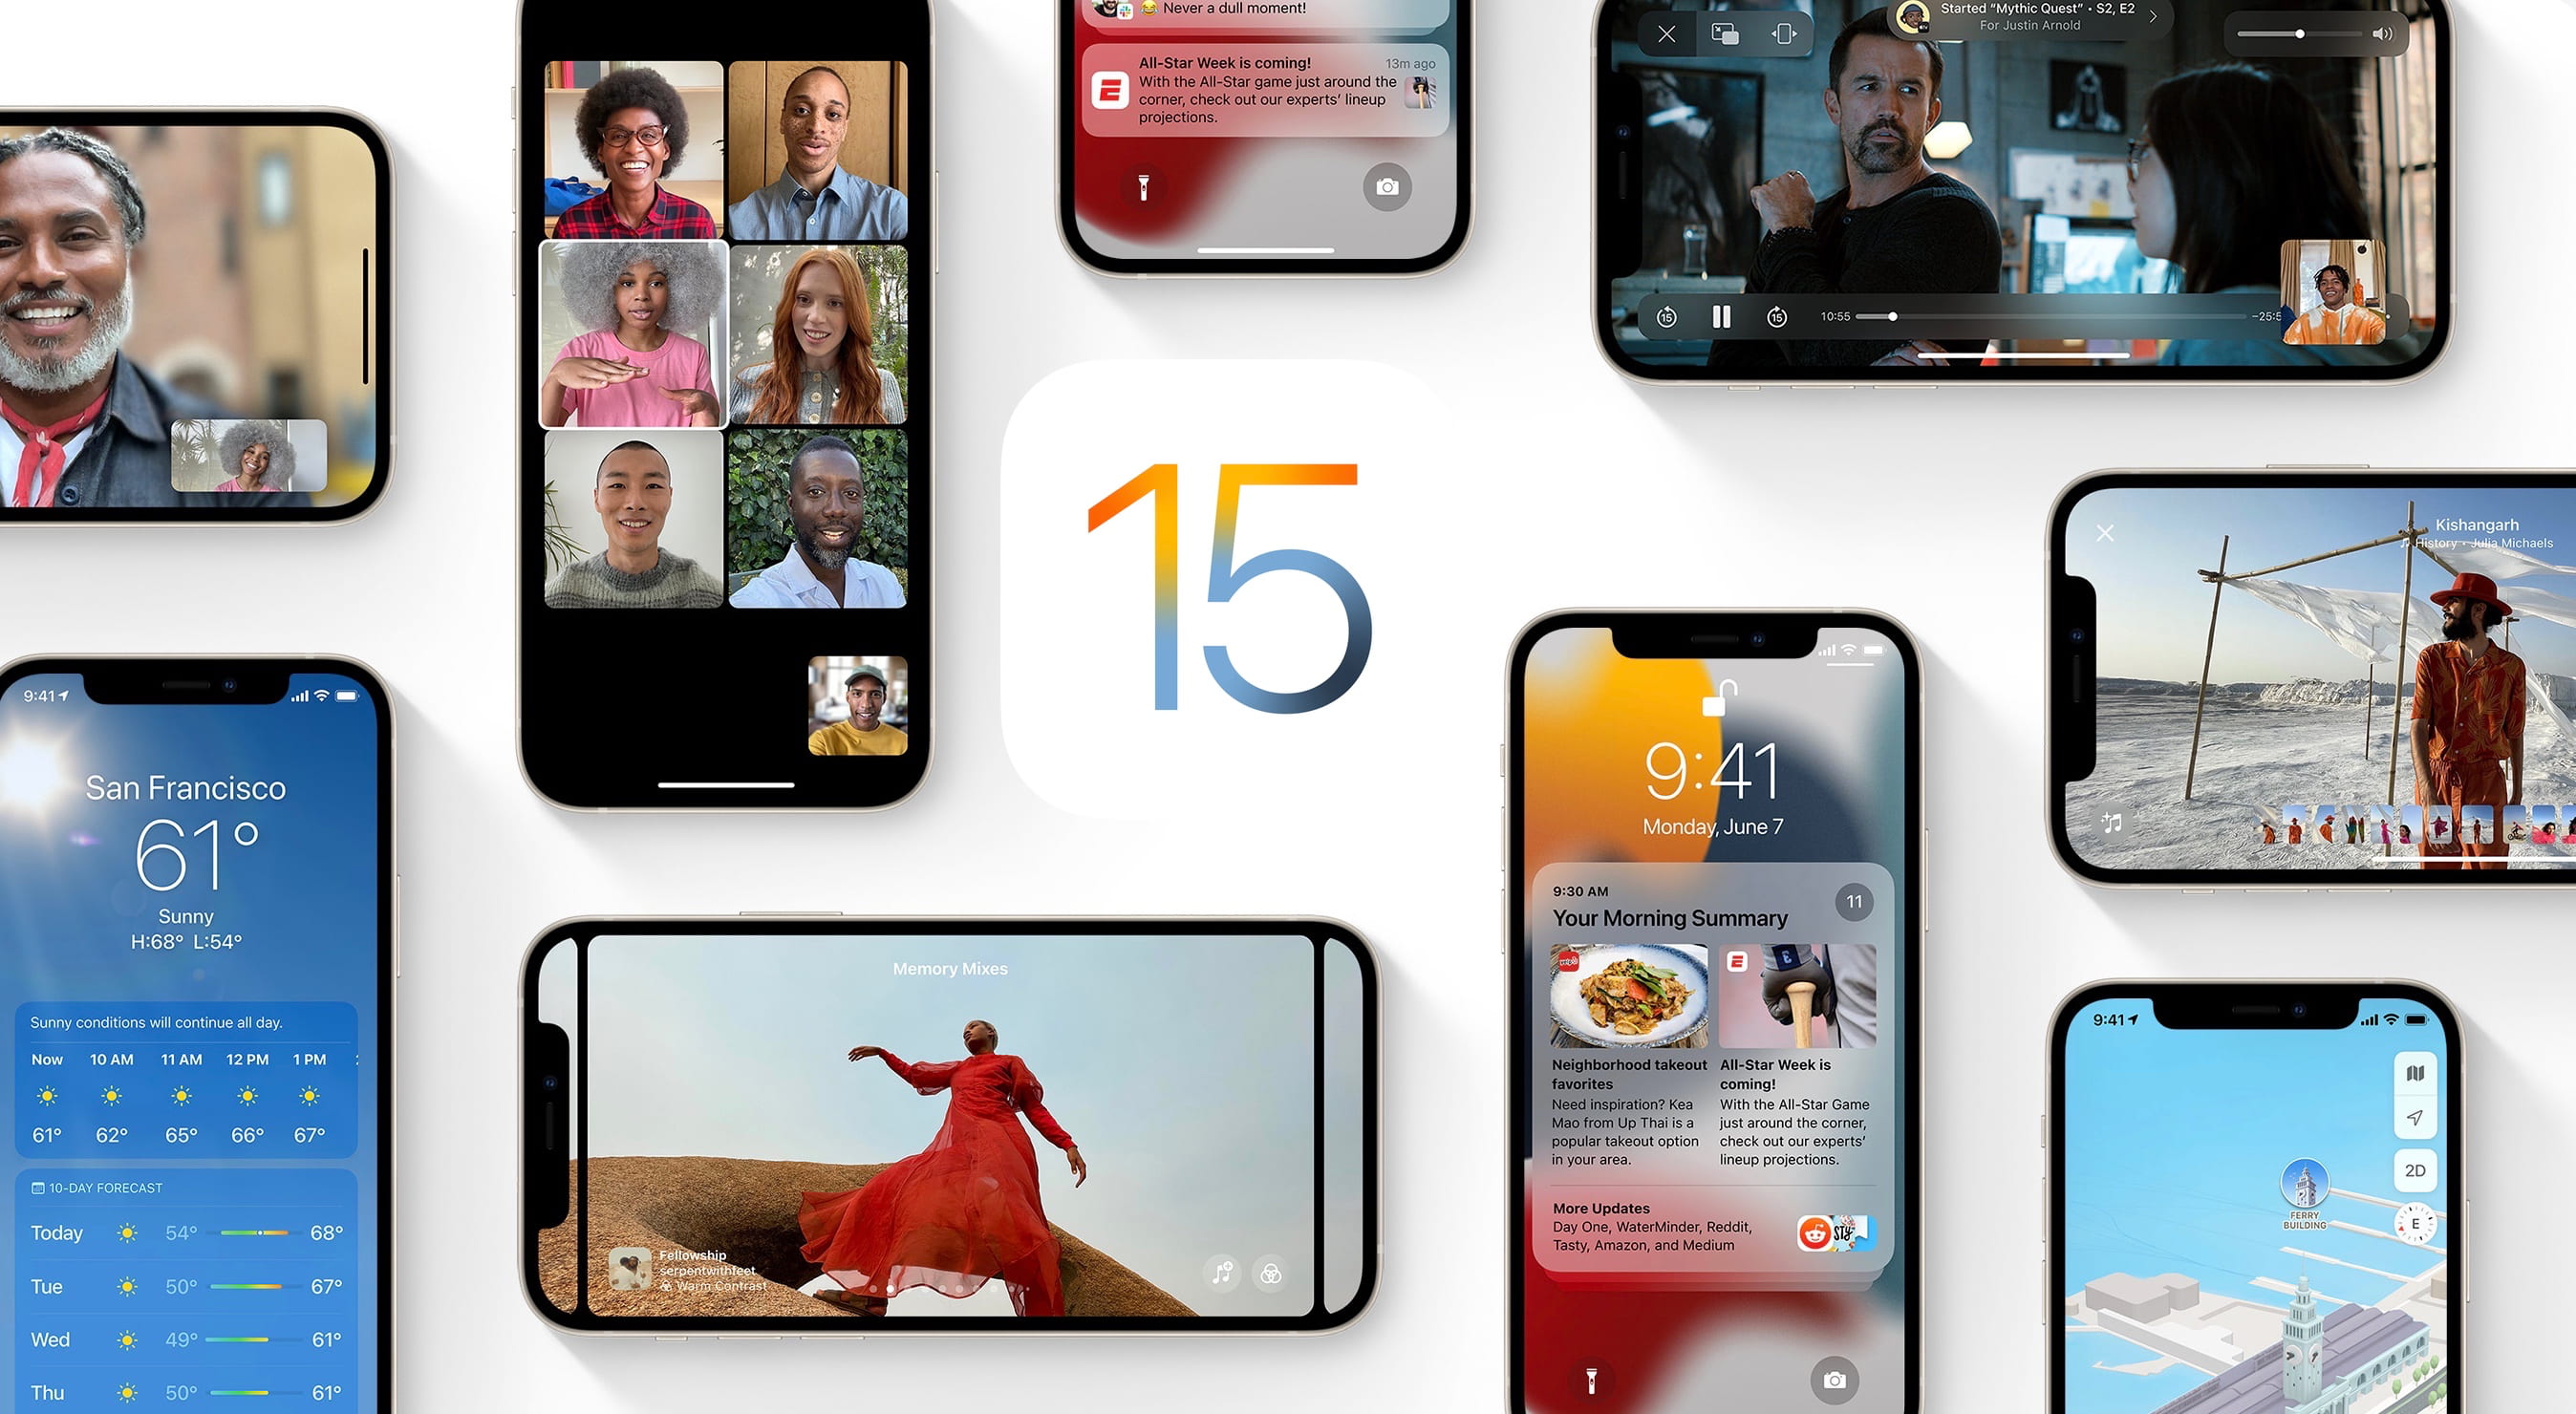 Here is everything new in iOS 15.5 and iPadOS 15.5